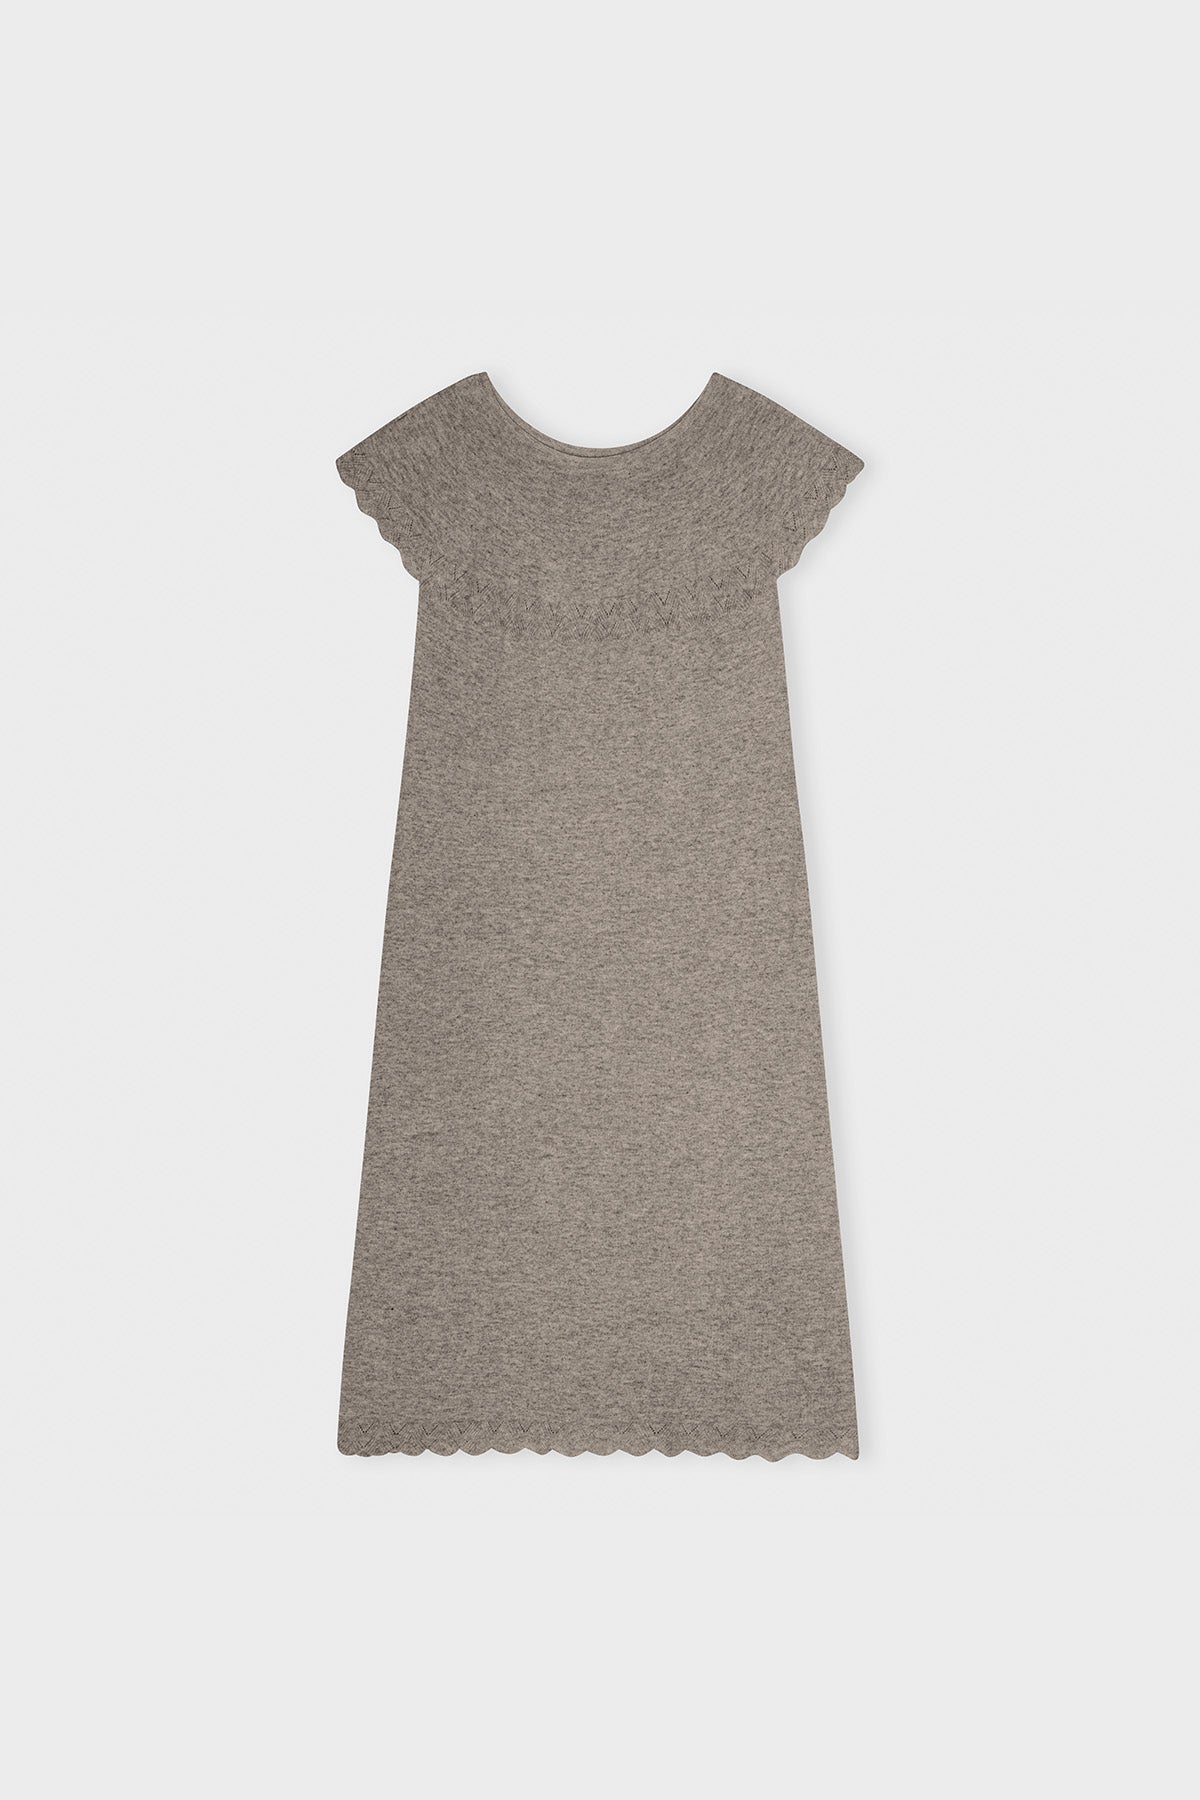 CARE BY ME 100% Cashmere Womens Beatrice Dress